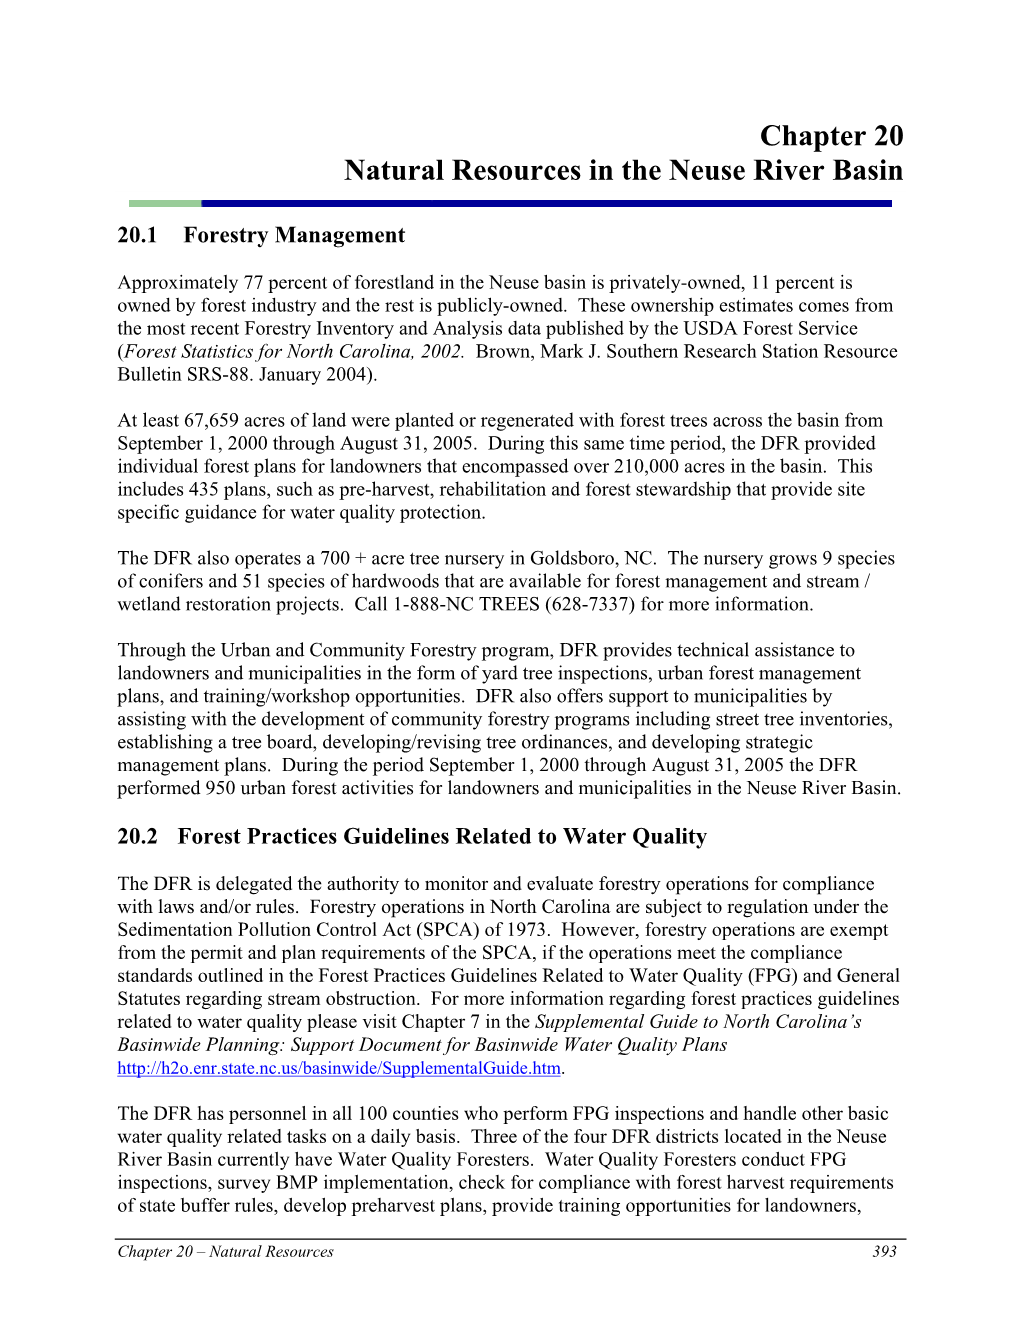 Natural Resources in the Neuse River Basin